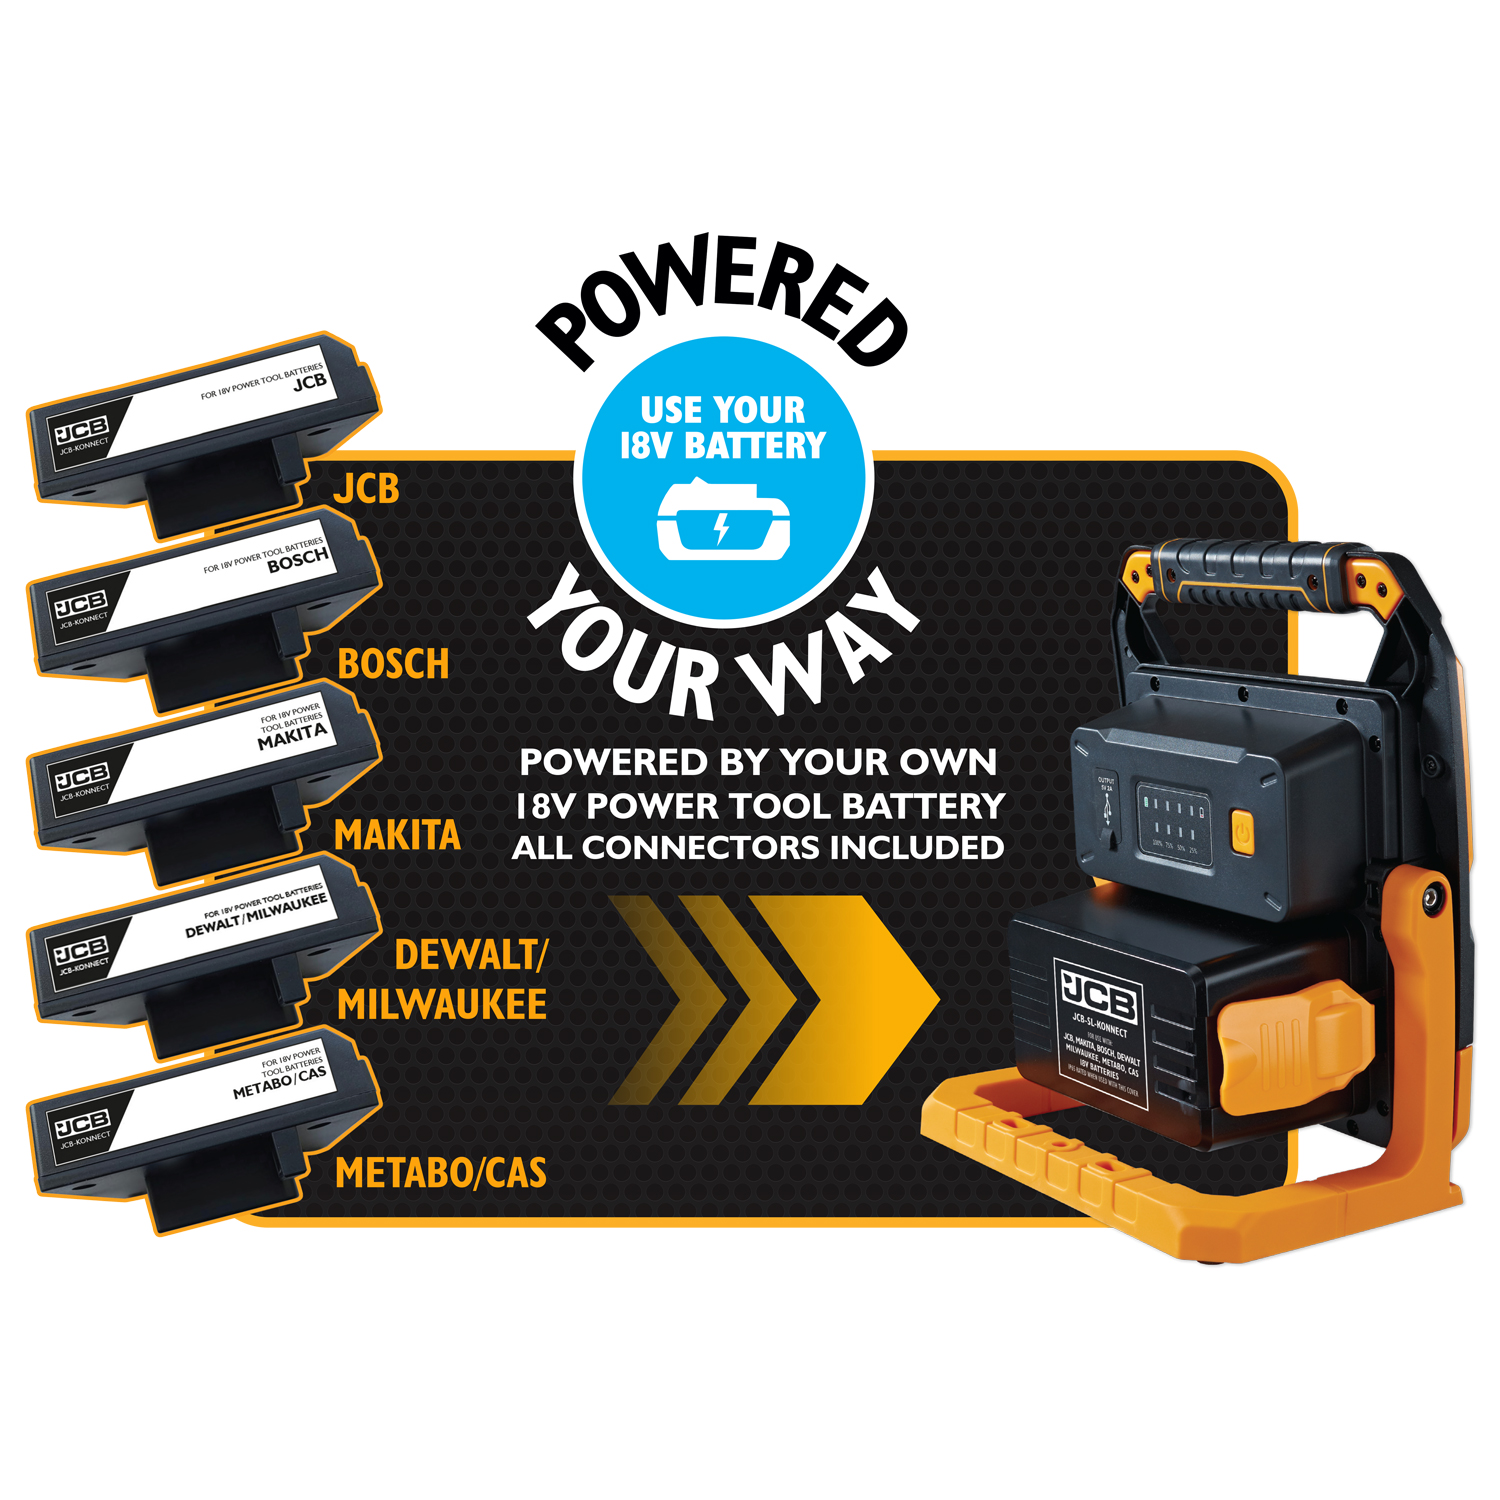 POWERED YOUR WAY - JCB KONNECT